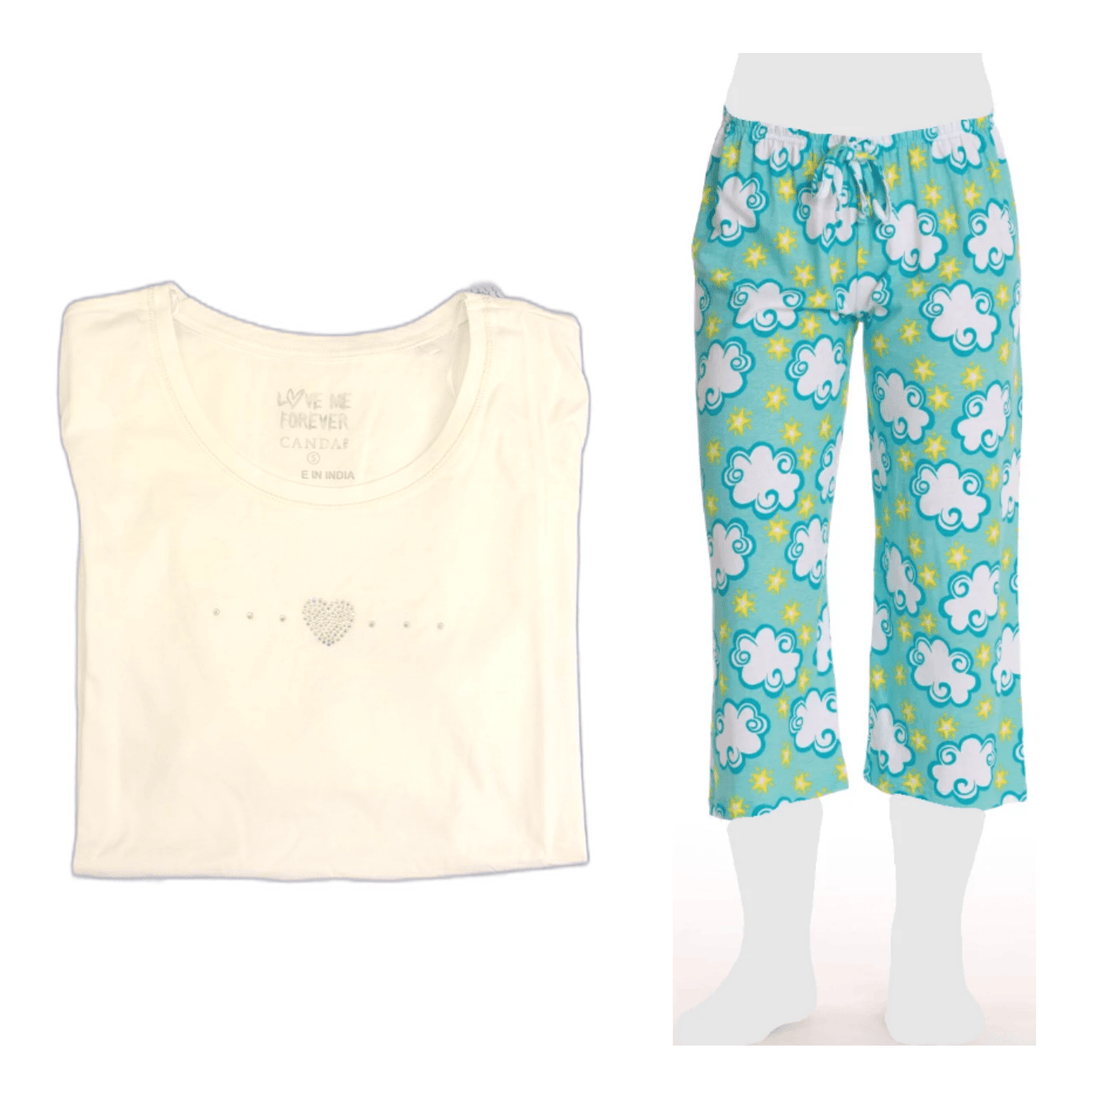 Women's Cozy Pajama Set Clouds Stars Pants and Cotton Soft Heart T shirt by Just Love - PremiumBrandGoods